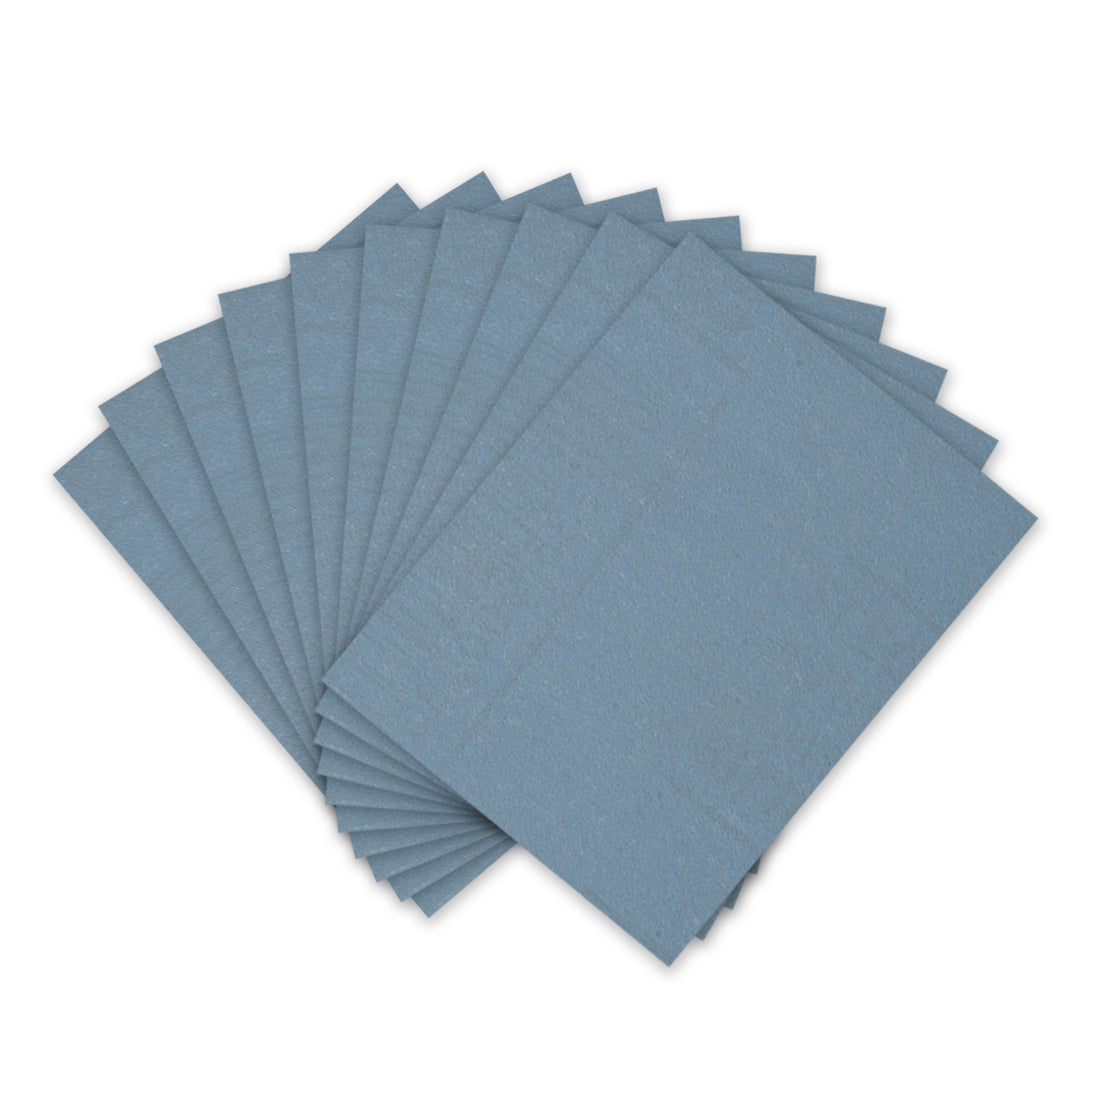 uxcell Uxcell 10pcs 8000 Grits Wet Dry Waterproof Sandpaper 9" x 11" Abrasive Paper Sheets